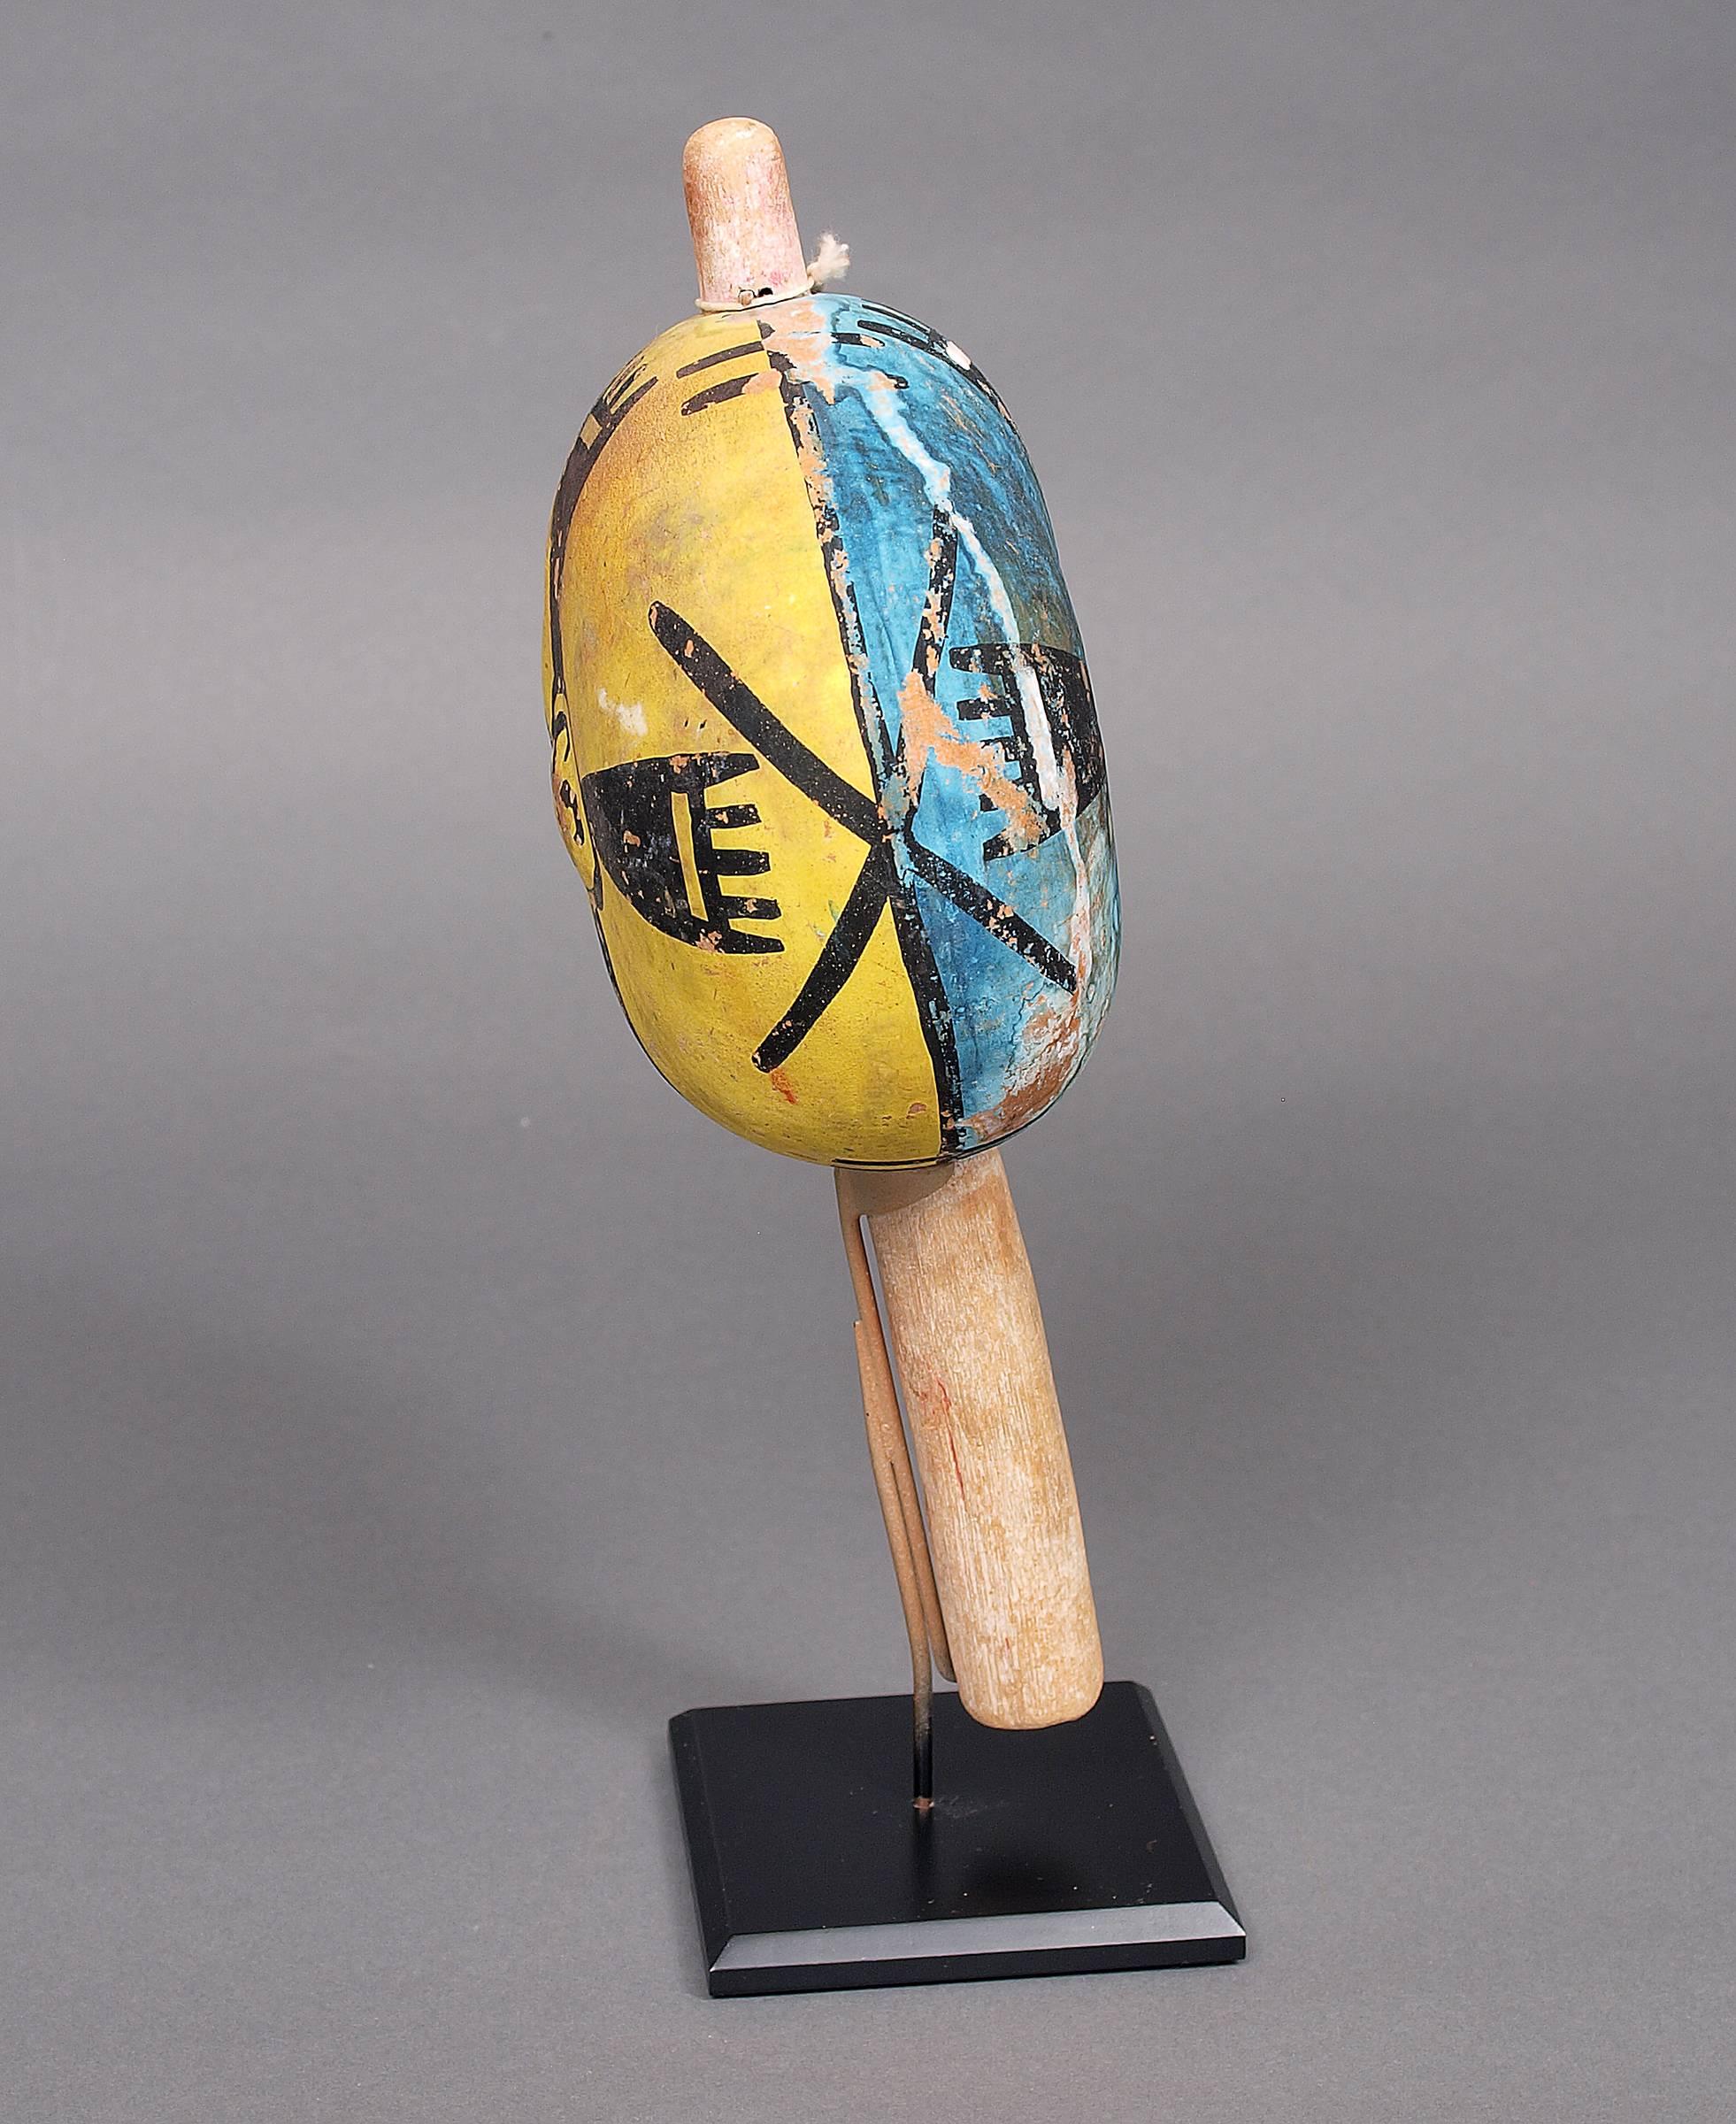 A traditional gourd rattle with blue, yellow and black vegetal paints and a wooden handle. Created by a member of the Hopi (Pueblo) tribe during the late 19th or early 20th century in Northern Arizona.

Custom display stand is